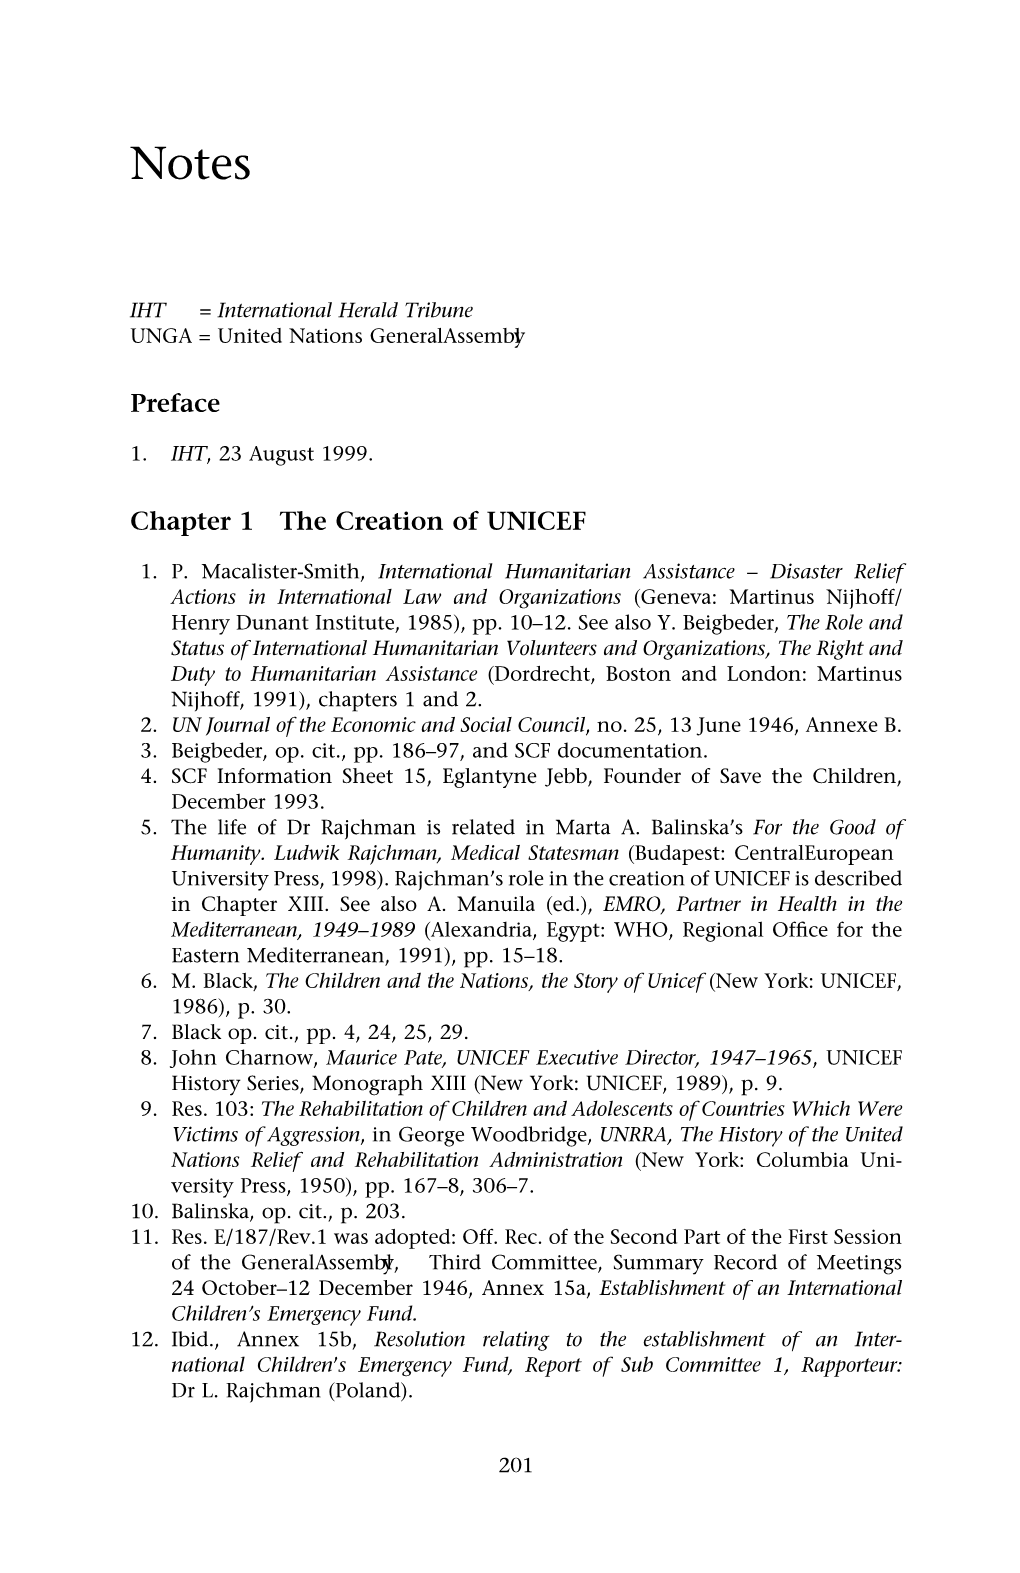 Preface Chapter 1 the Creation of UNICEF